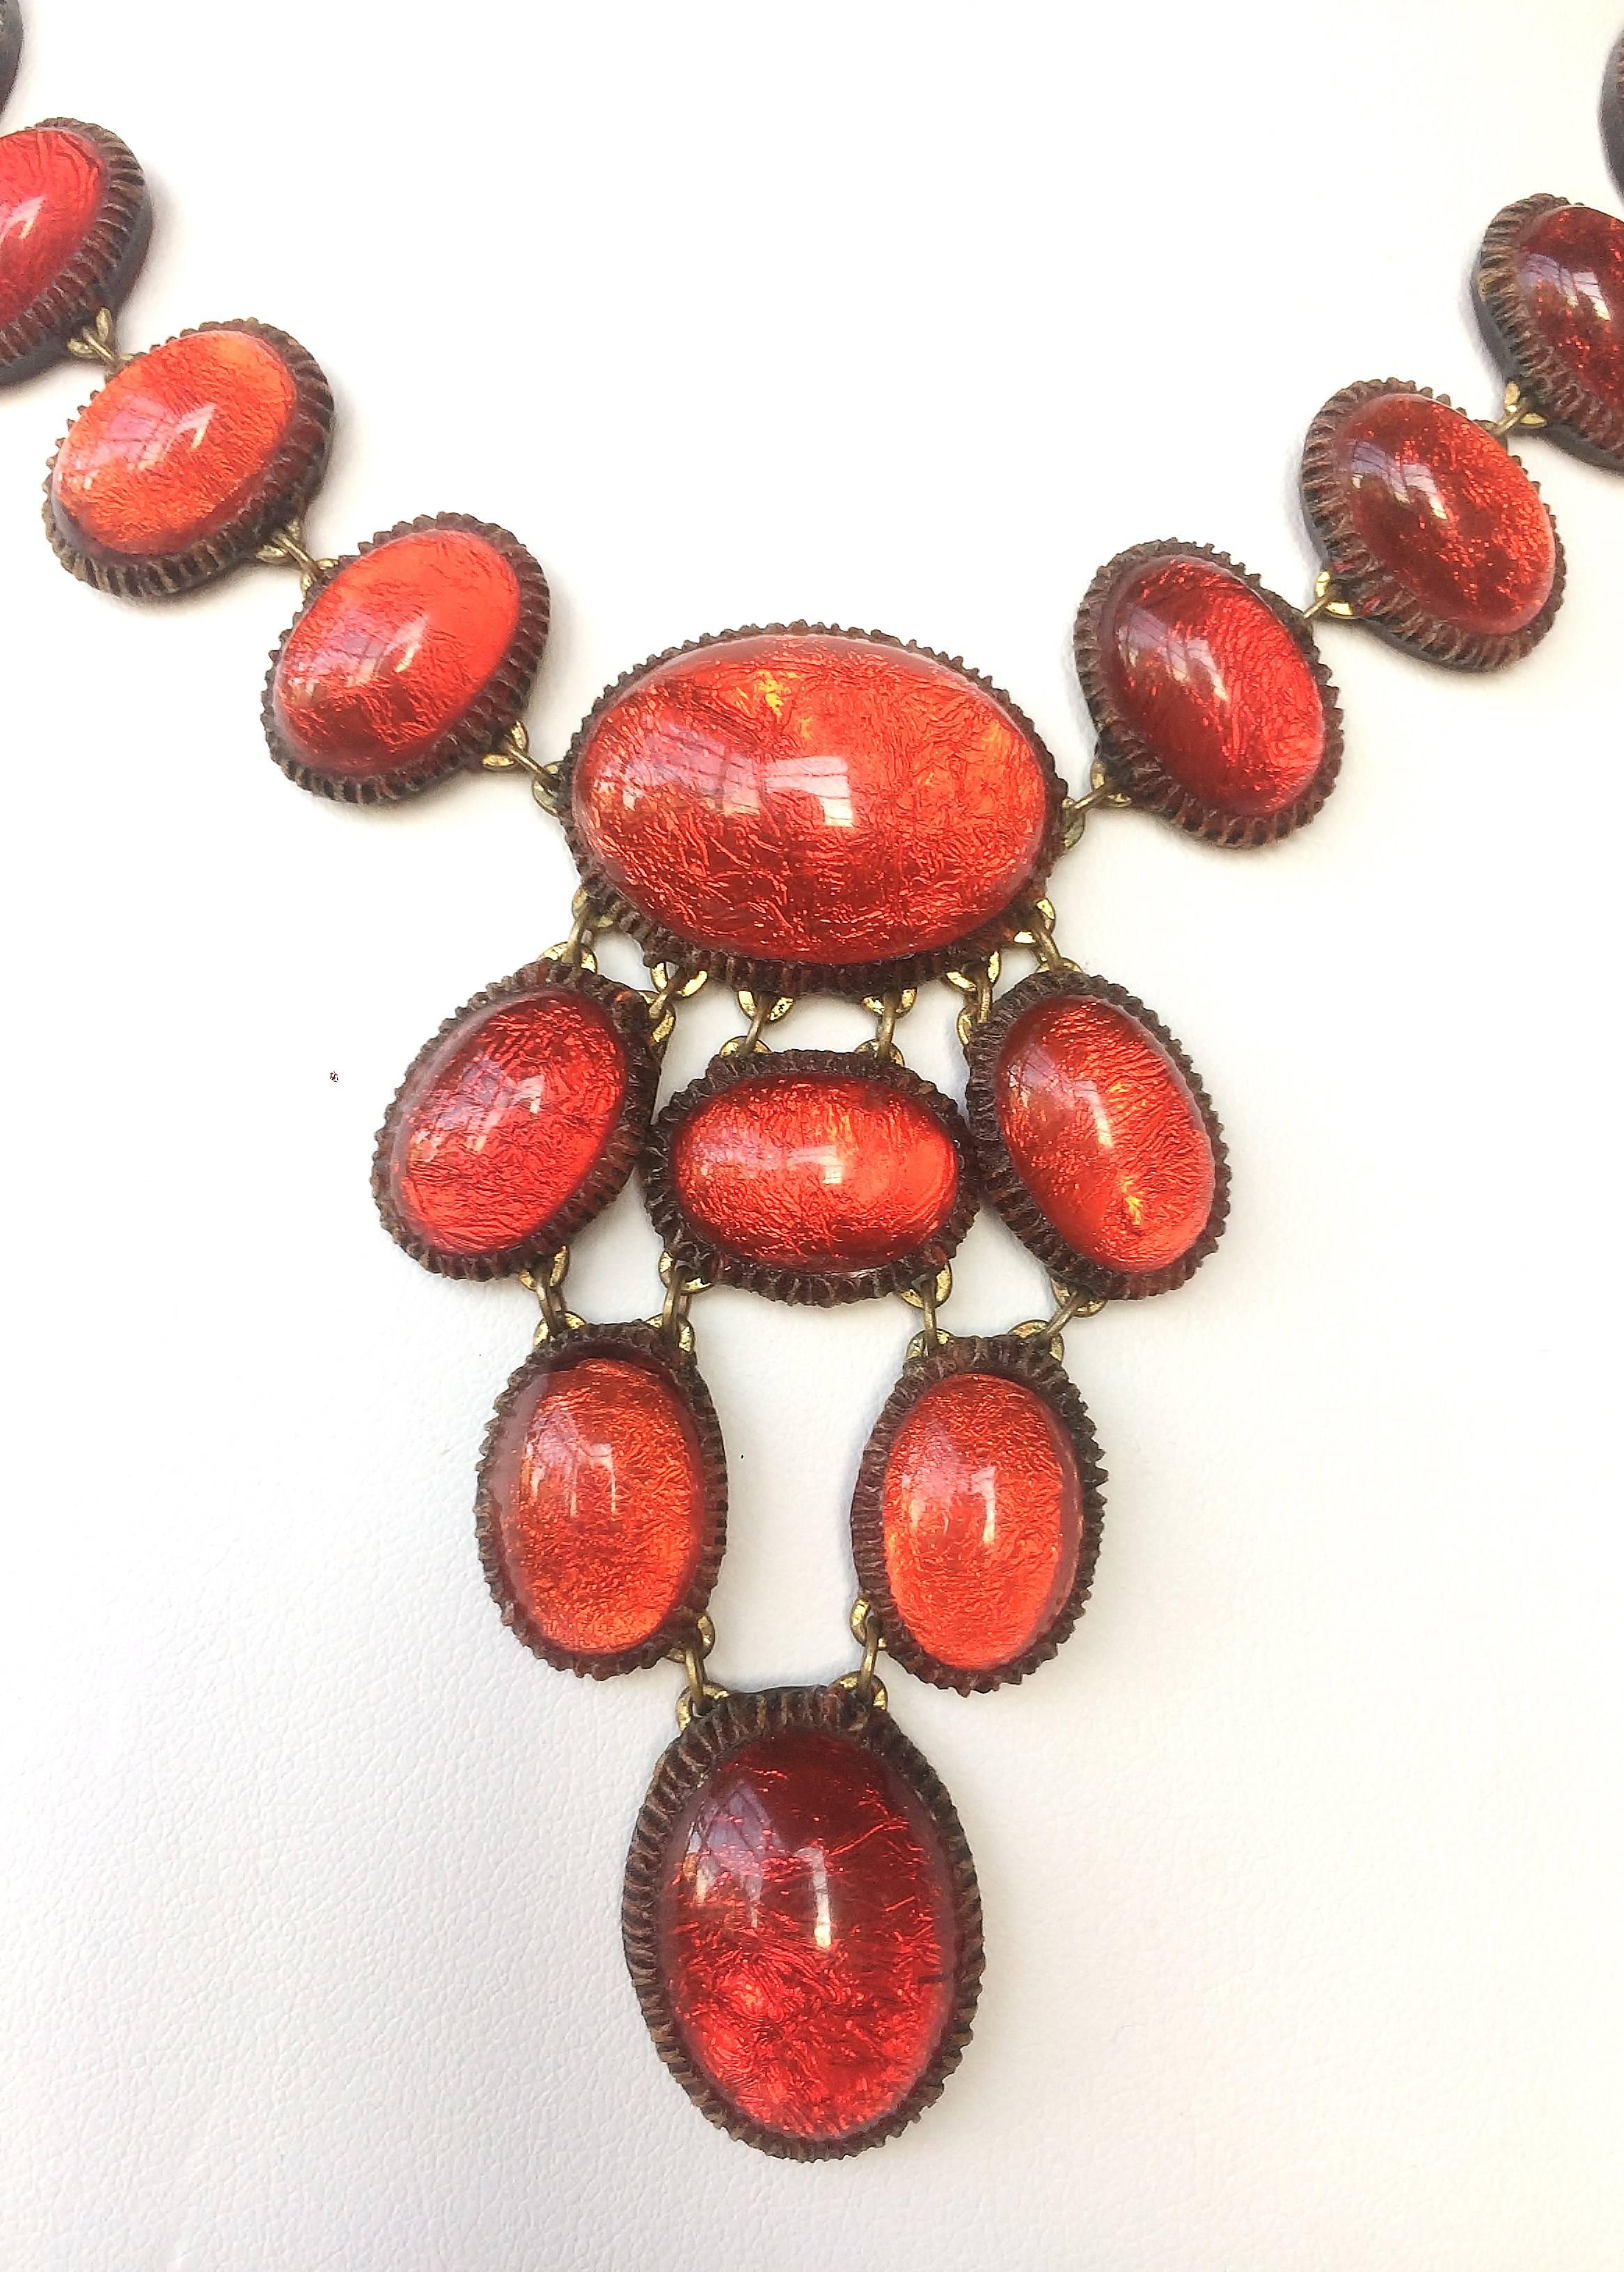 A ravishing and dynamic colour of red gives this talousel and foil necklace its seductive charm.
In the style of Line Vautrin (but not created by her workshop), this necklace is very light and easy to wear, lighting up the face of whoever wears it.